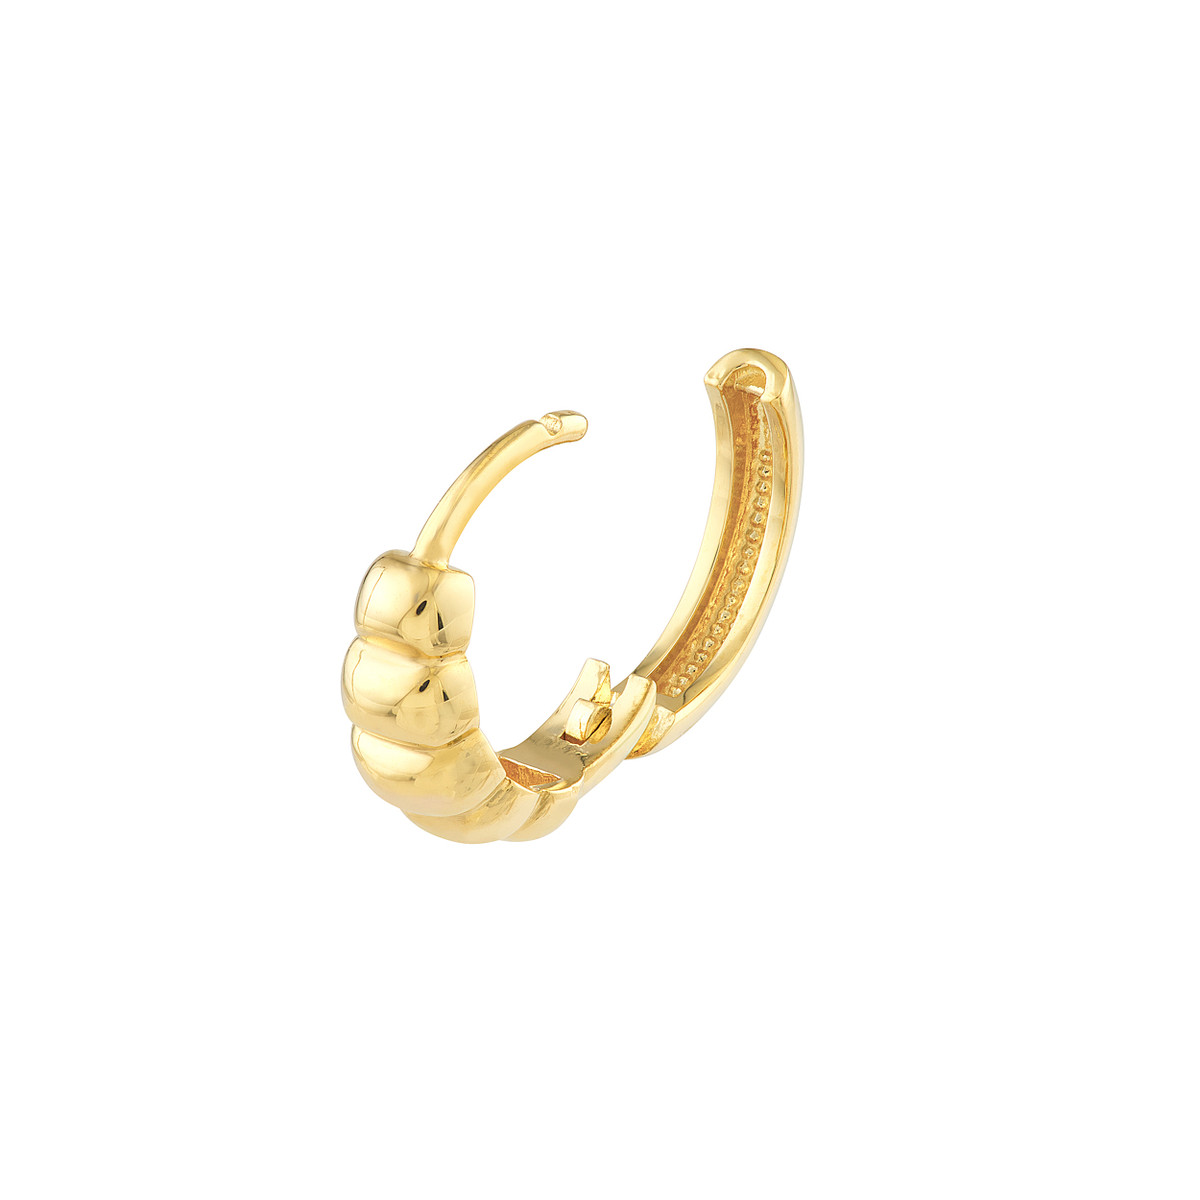 Korman Signature 14kt Yellow Gold Puffy Polished Hoops